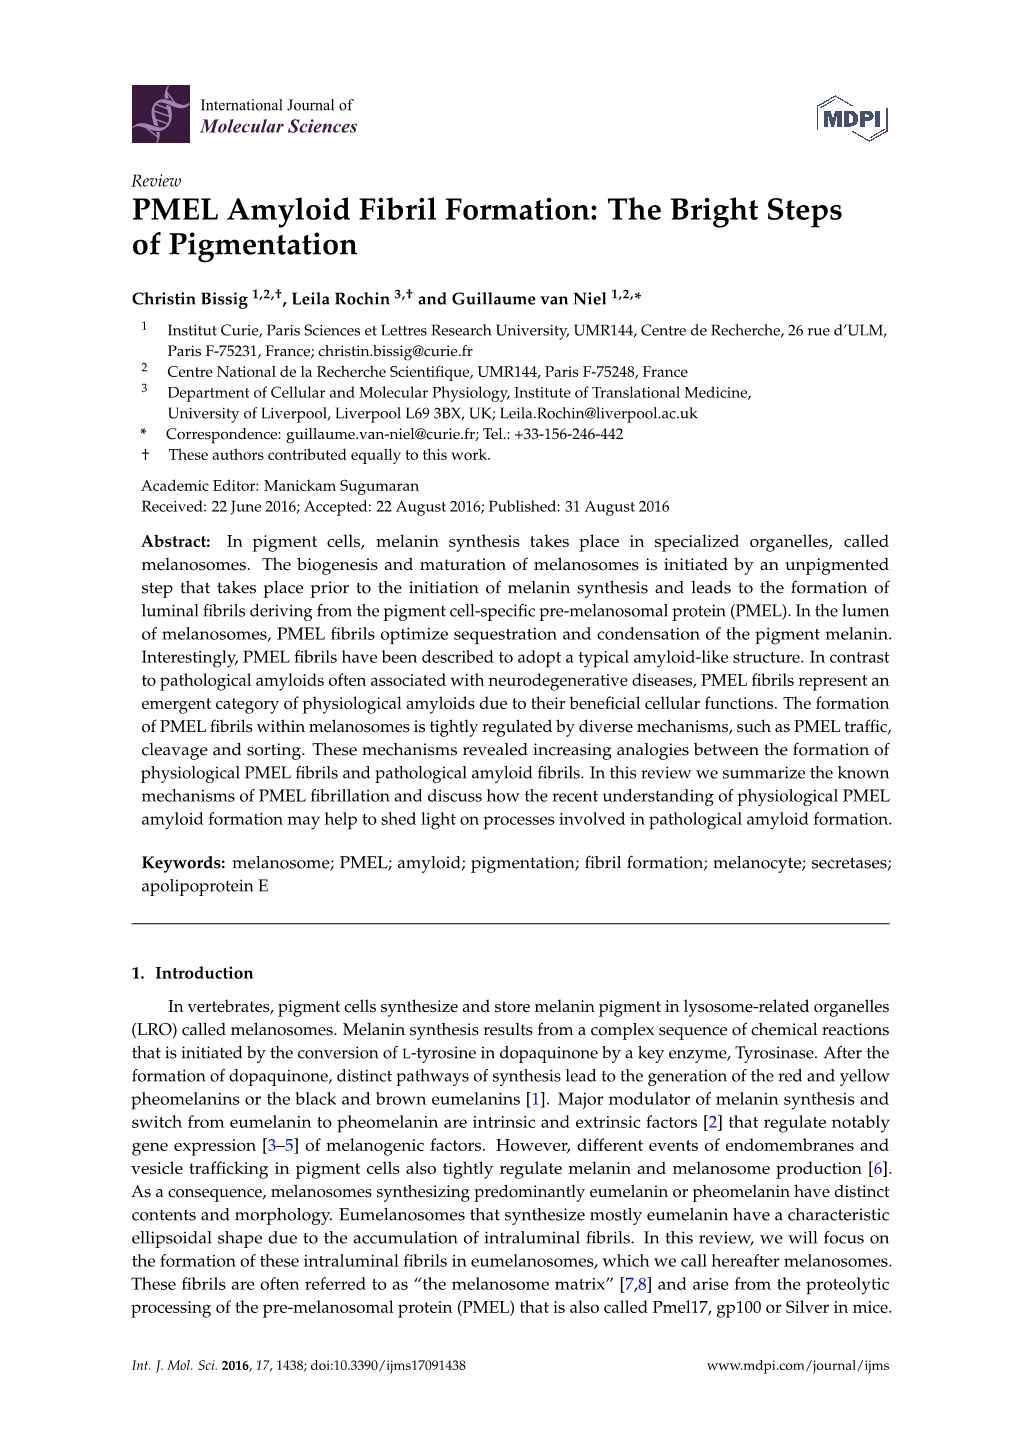 PMEL Amyloid Fibril Formation: the Bright Steps of Pigmentation